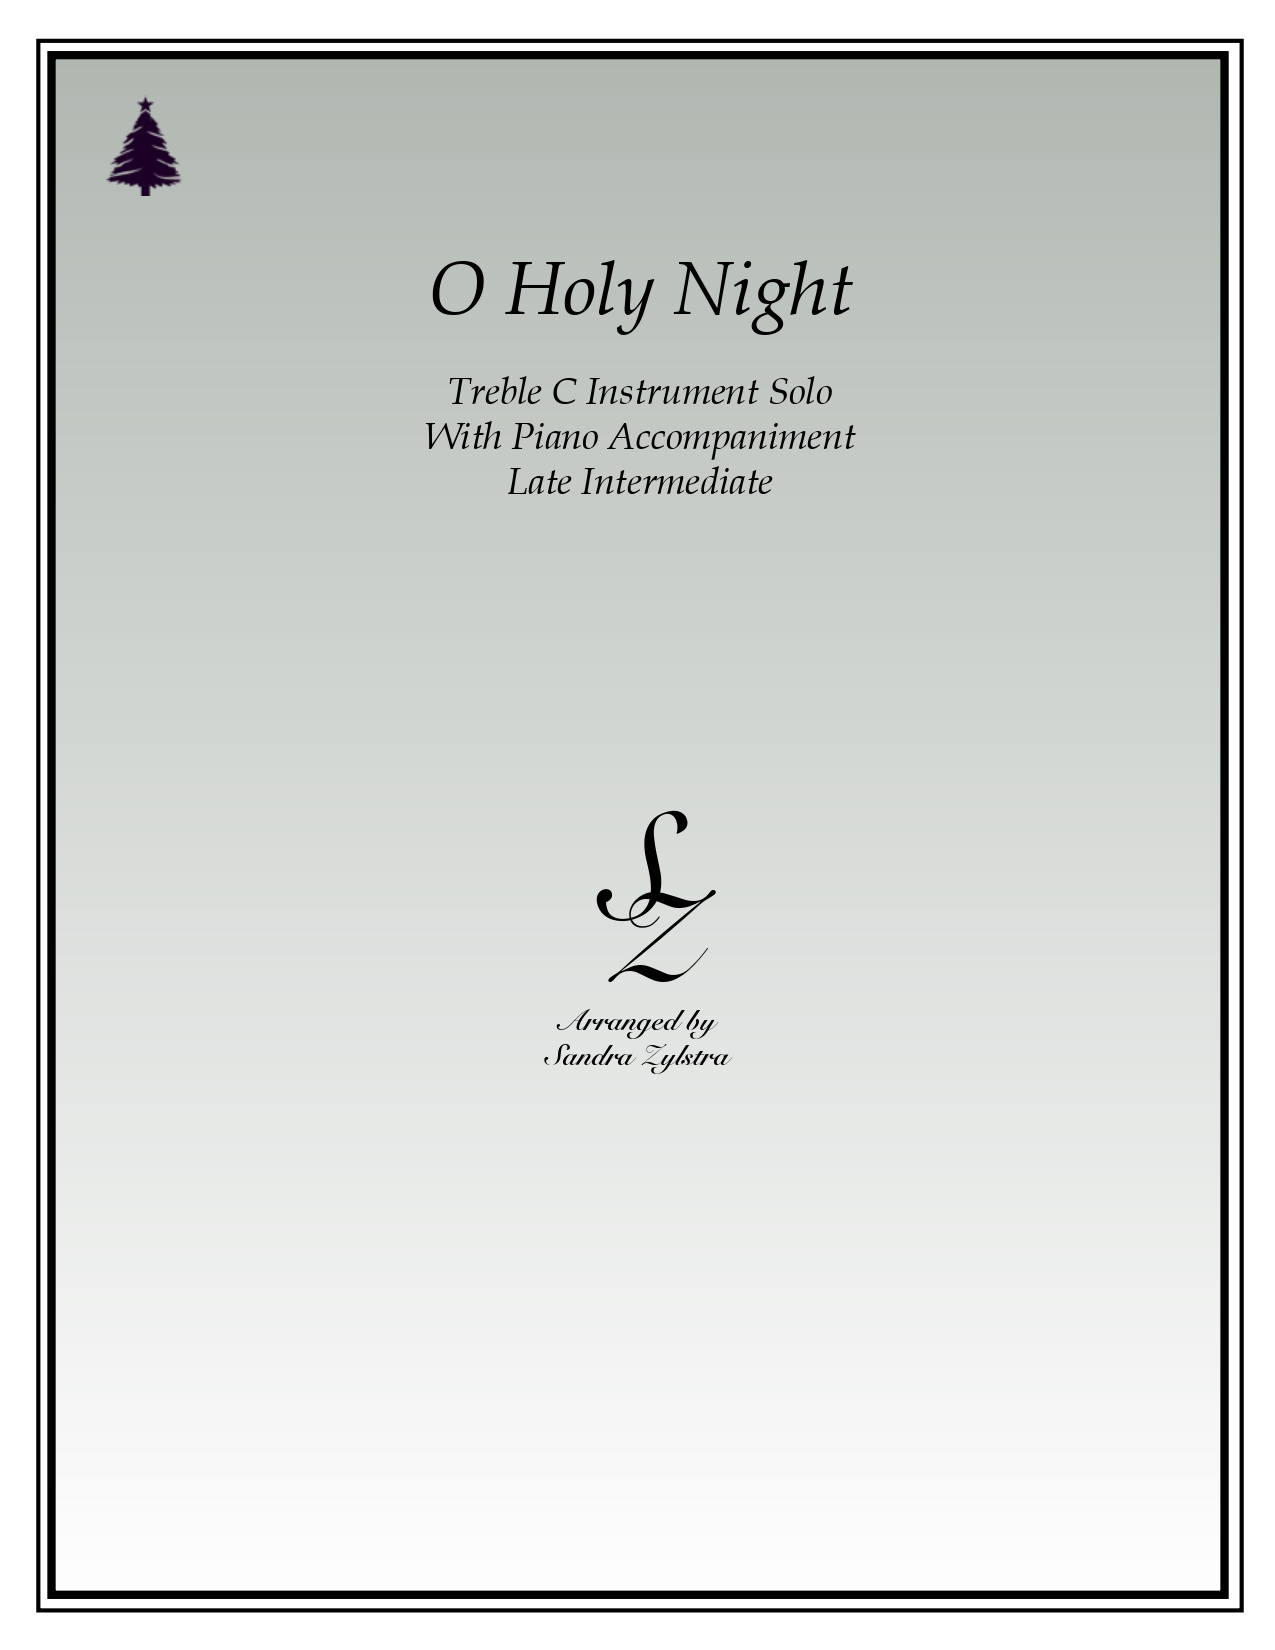 O Holy Night treble C instrument solo part cover page 00011